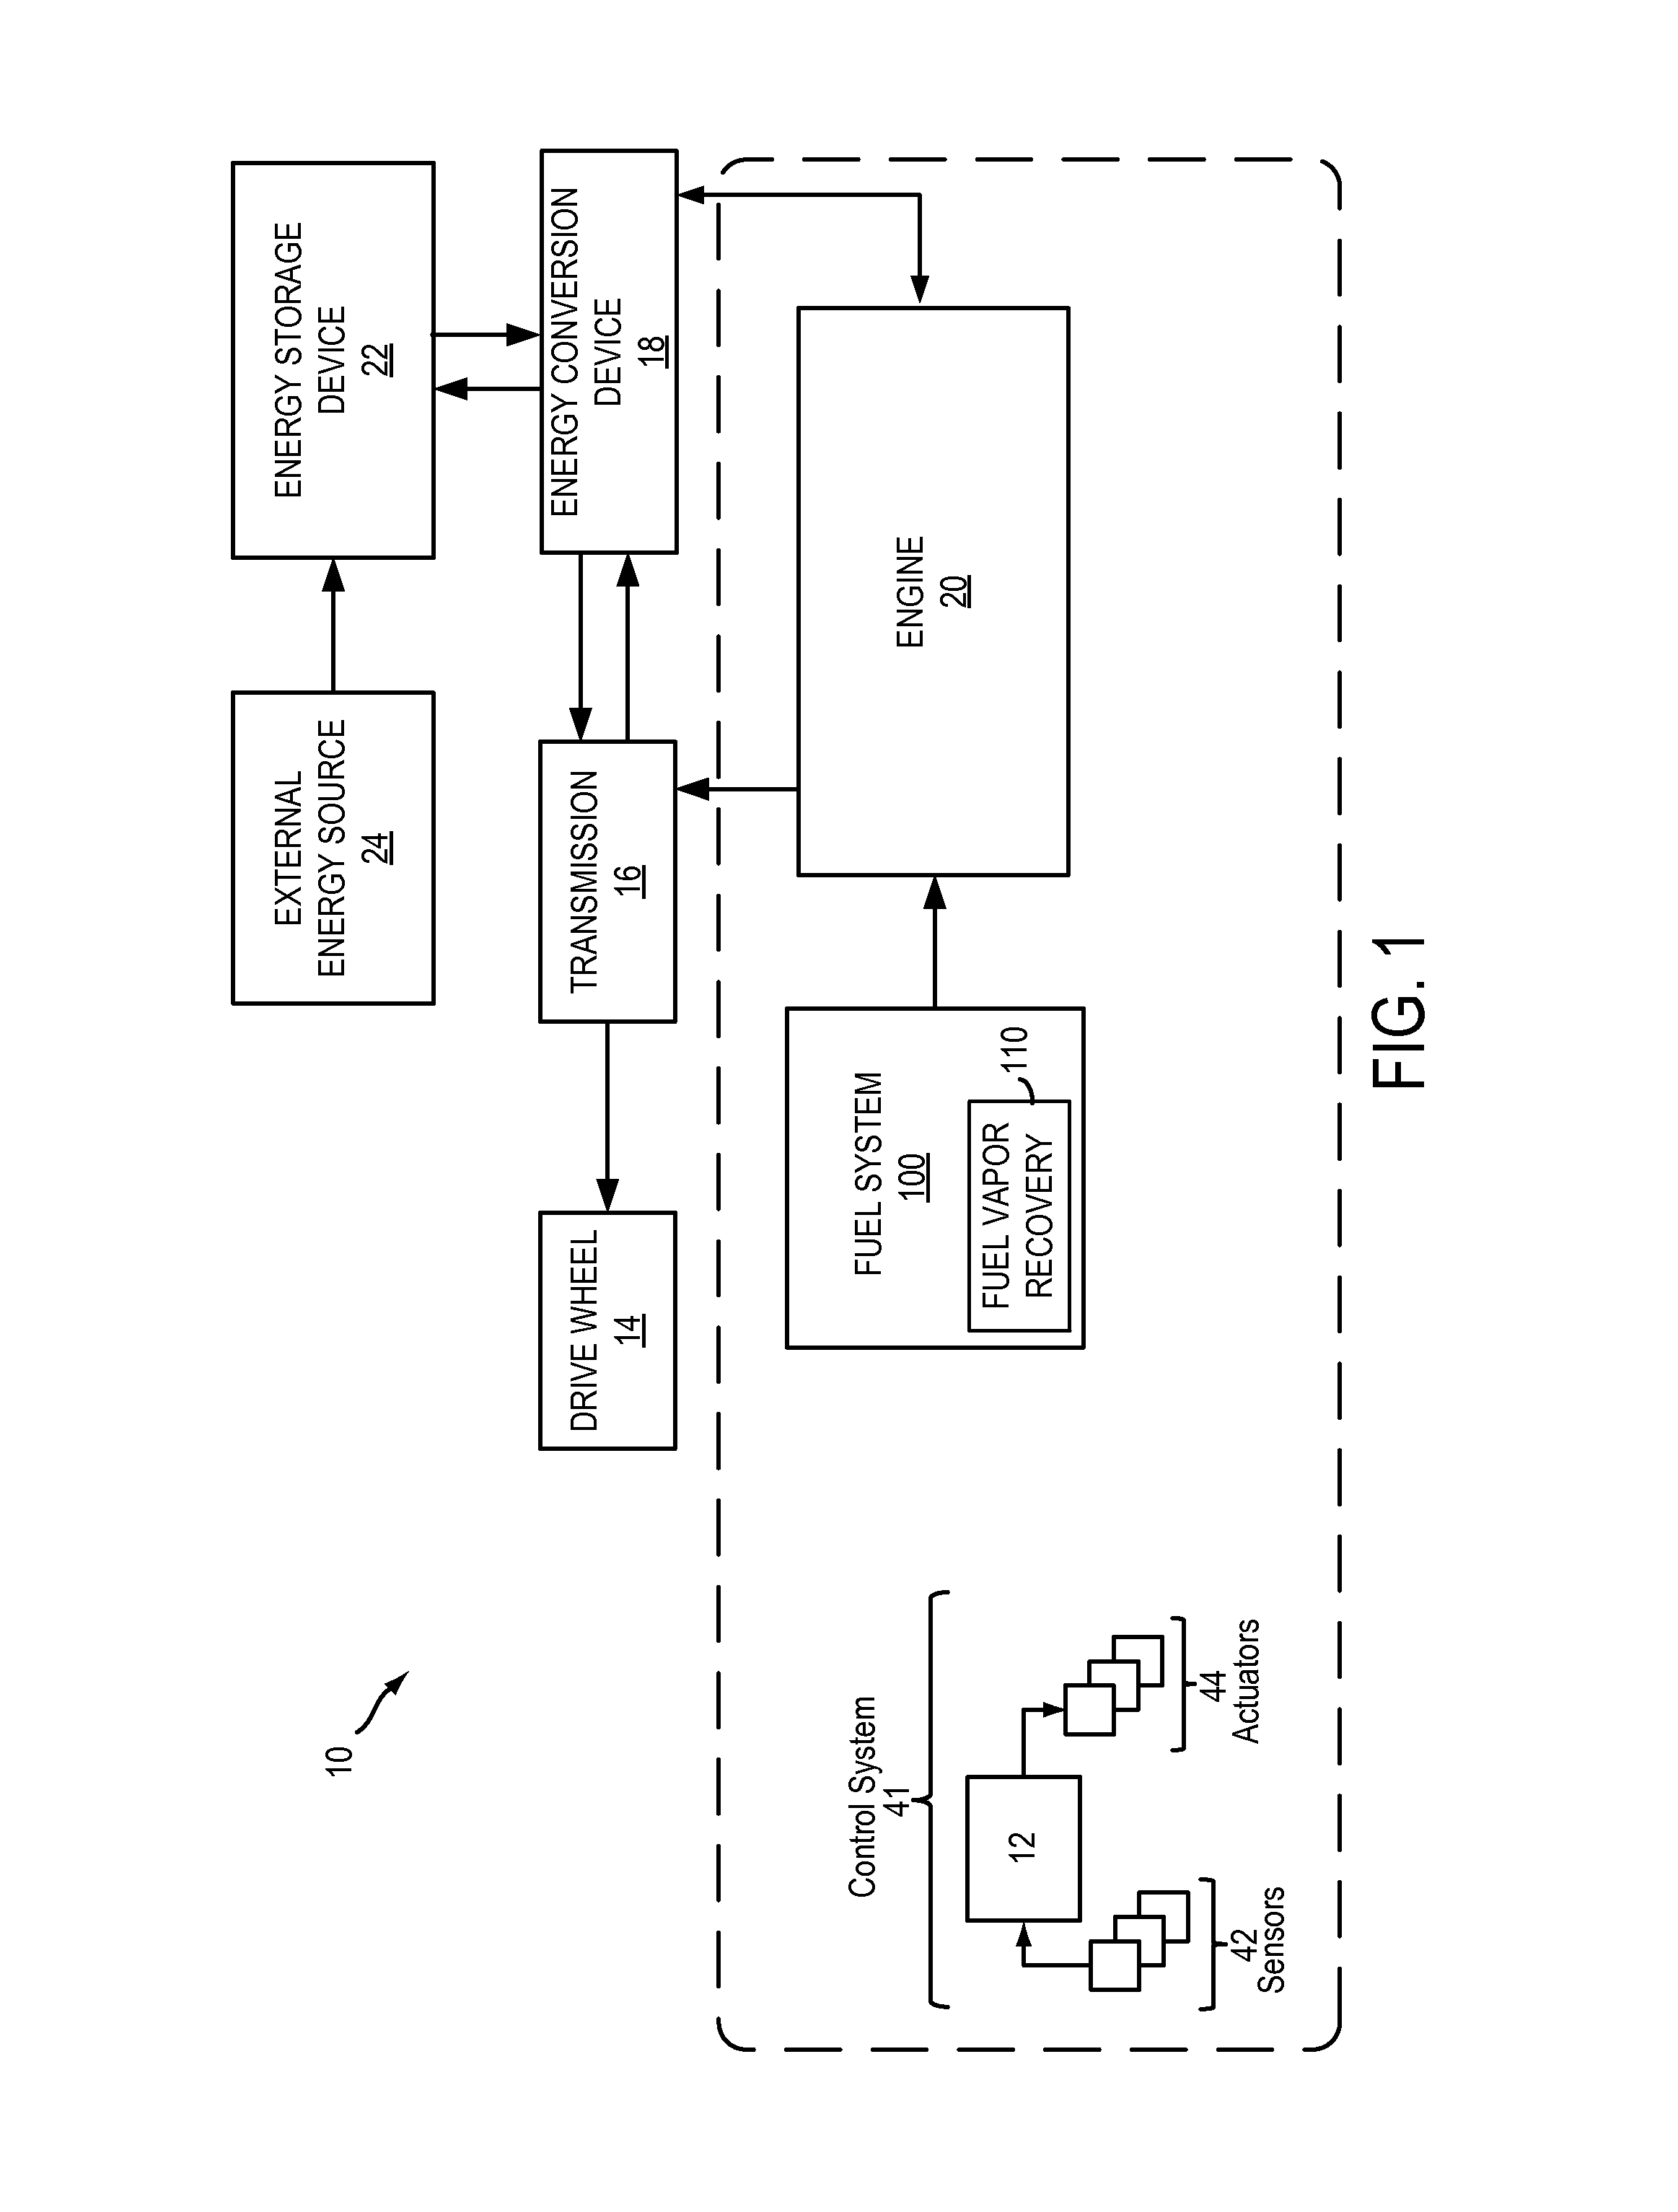 Engine with laser ignition and measurement